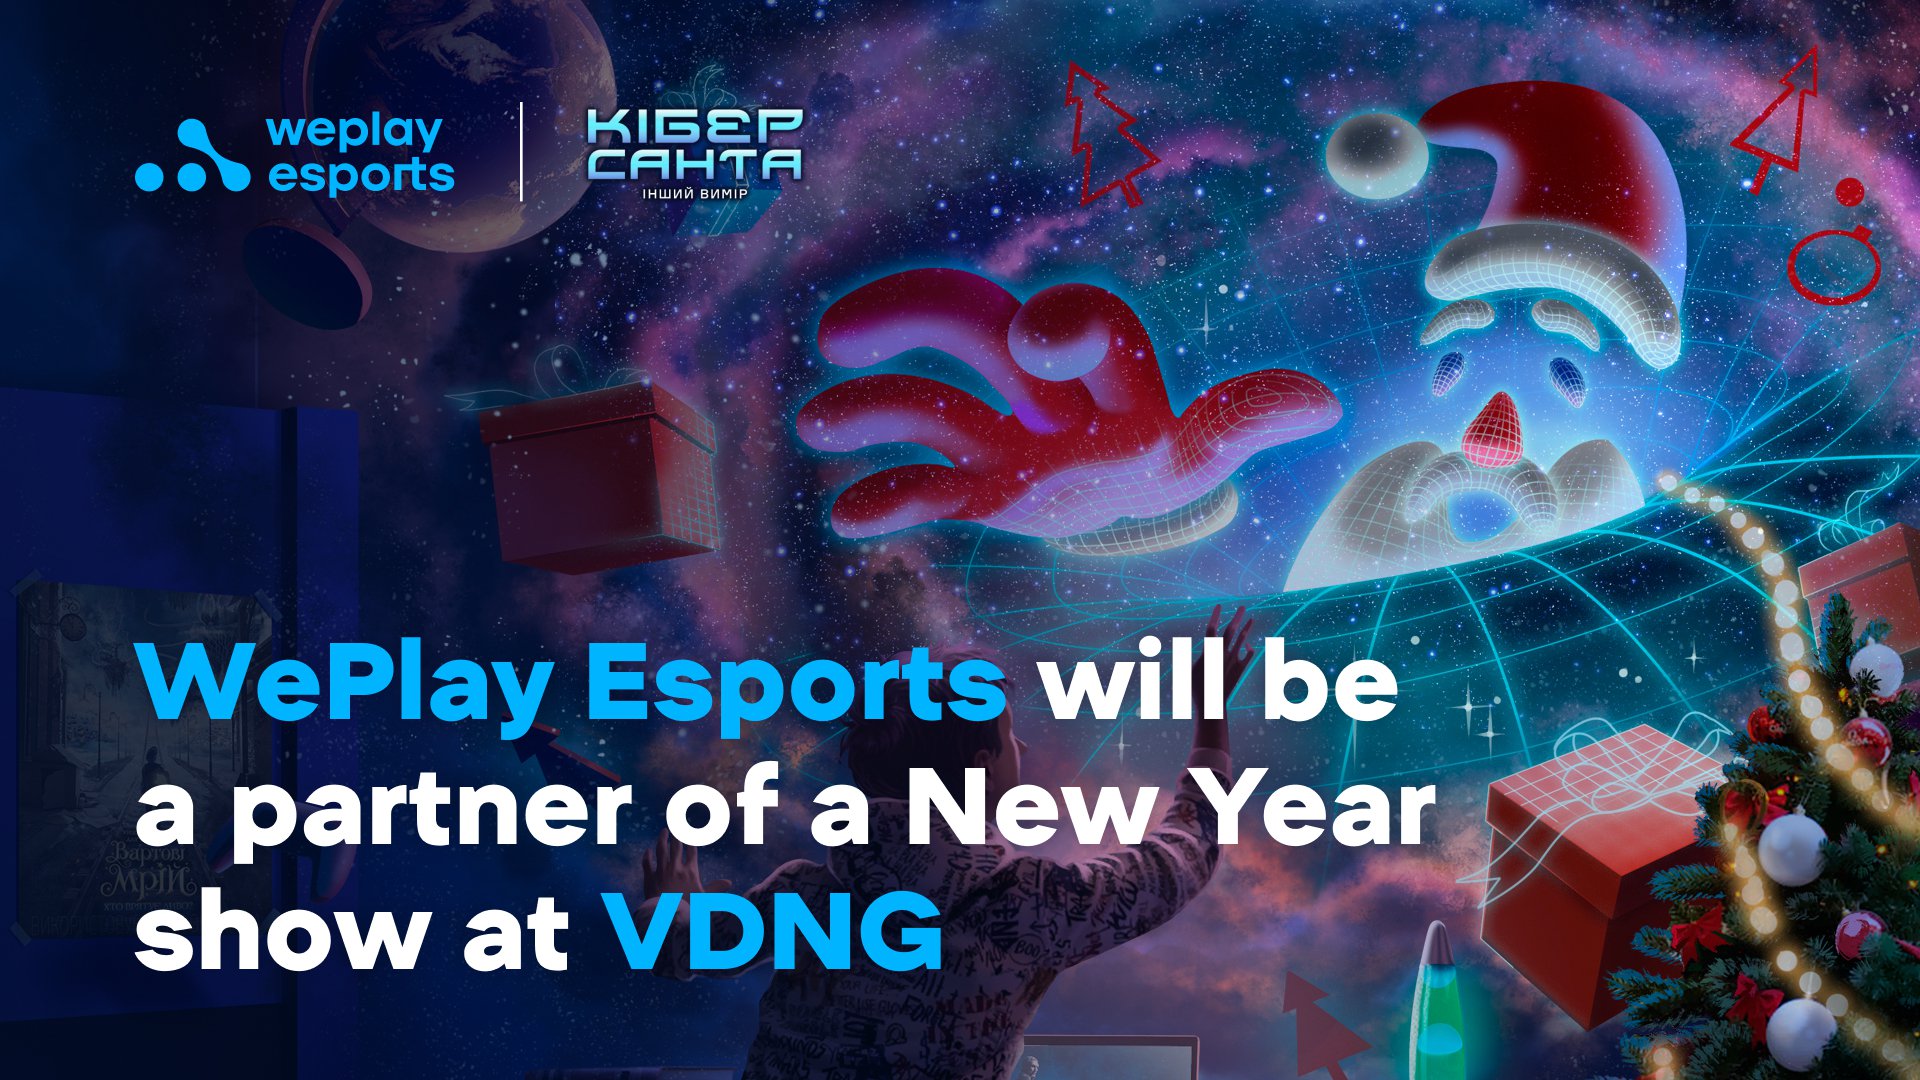 WePlay Esports will be a partner of a New Year’s show at the VDNG. Image: WePlay Holding